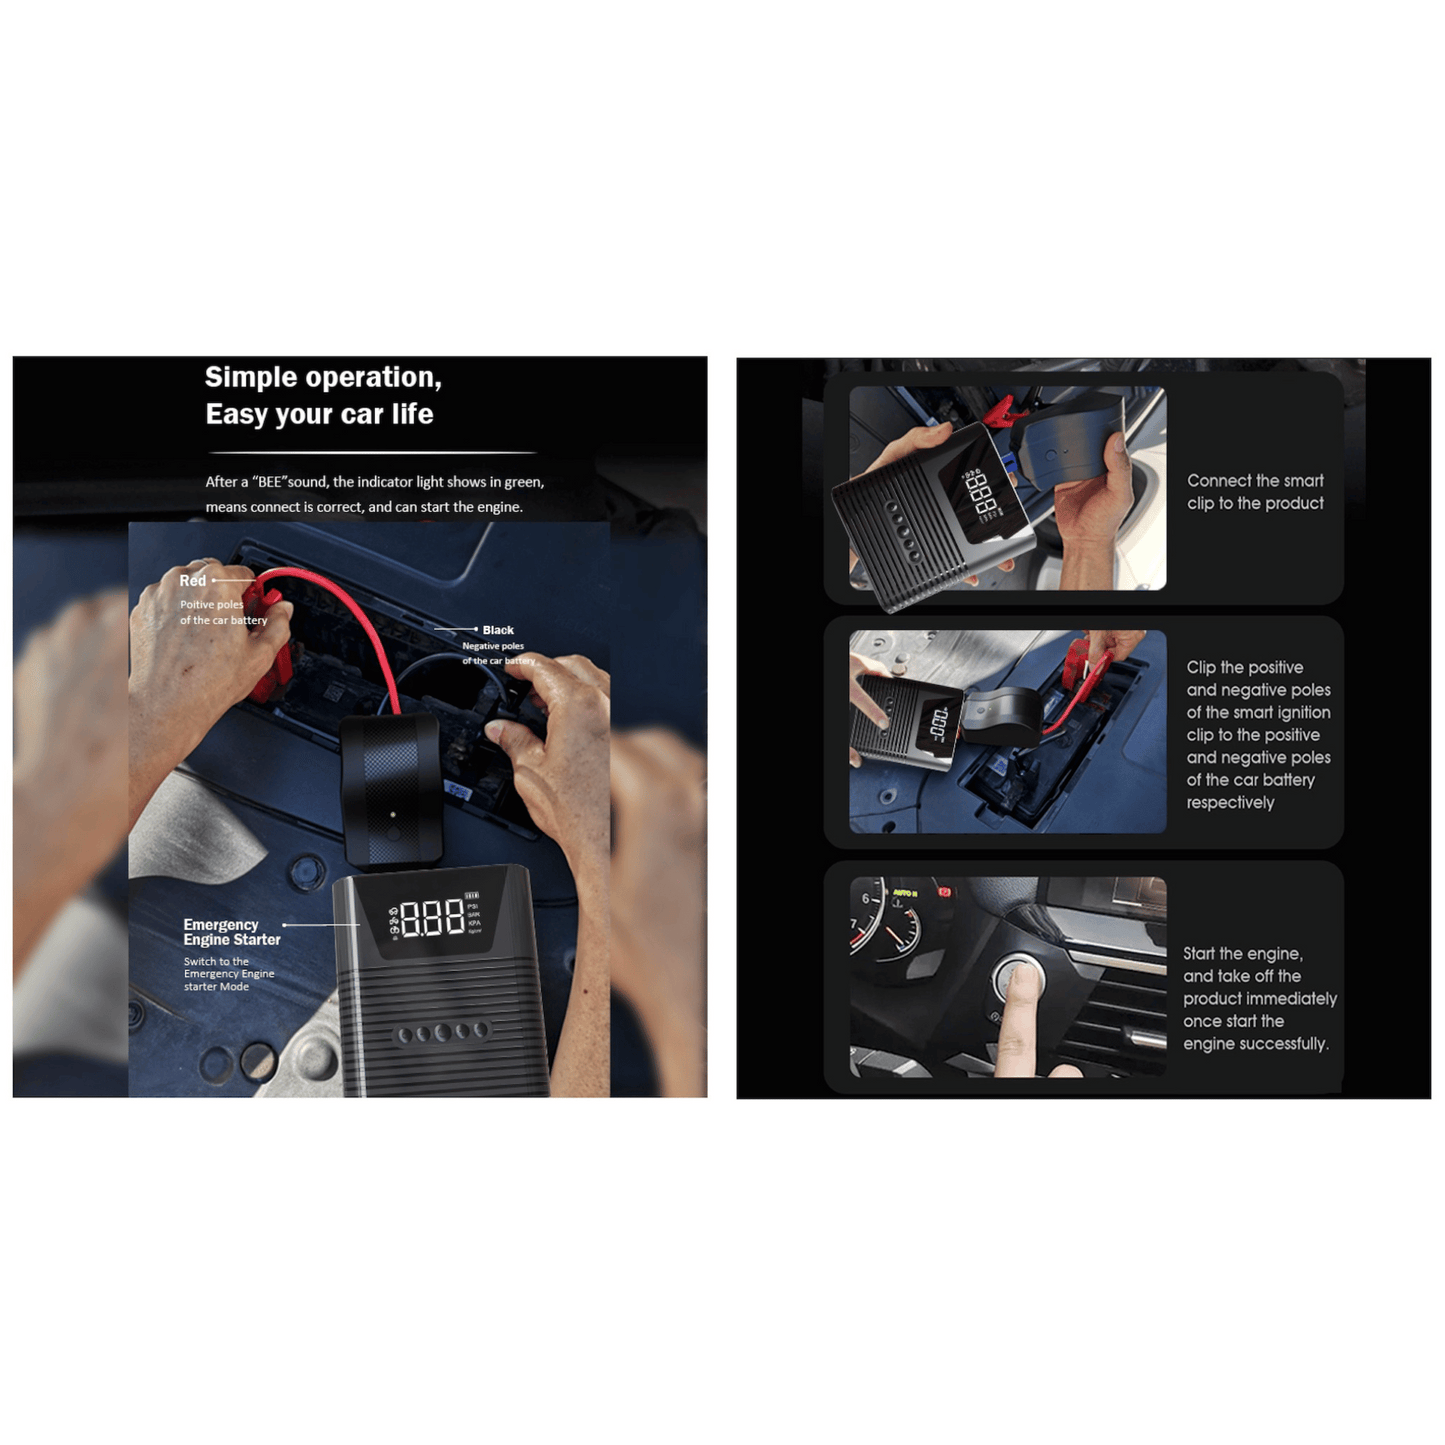 ND9 Pro Wireless Vehicle Jumper Cables & Portable Air compressor